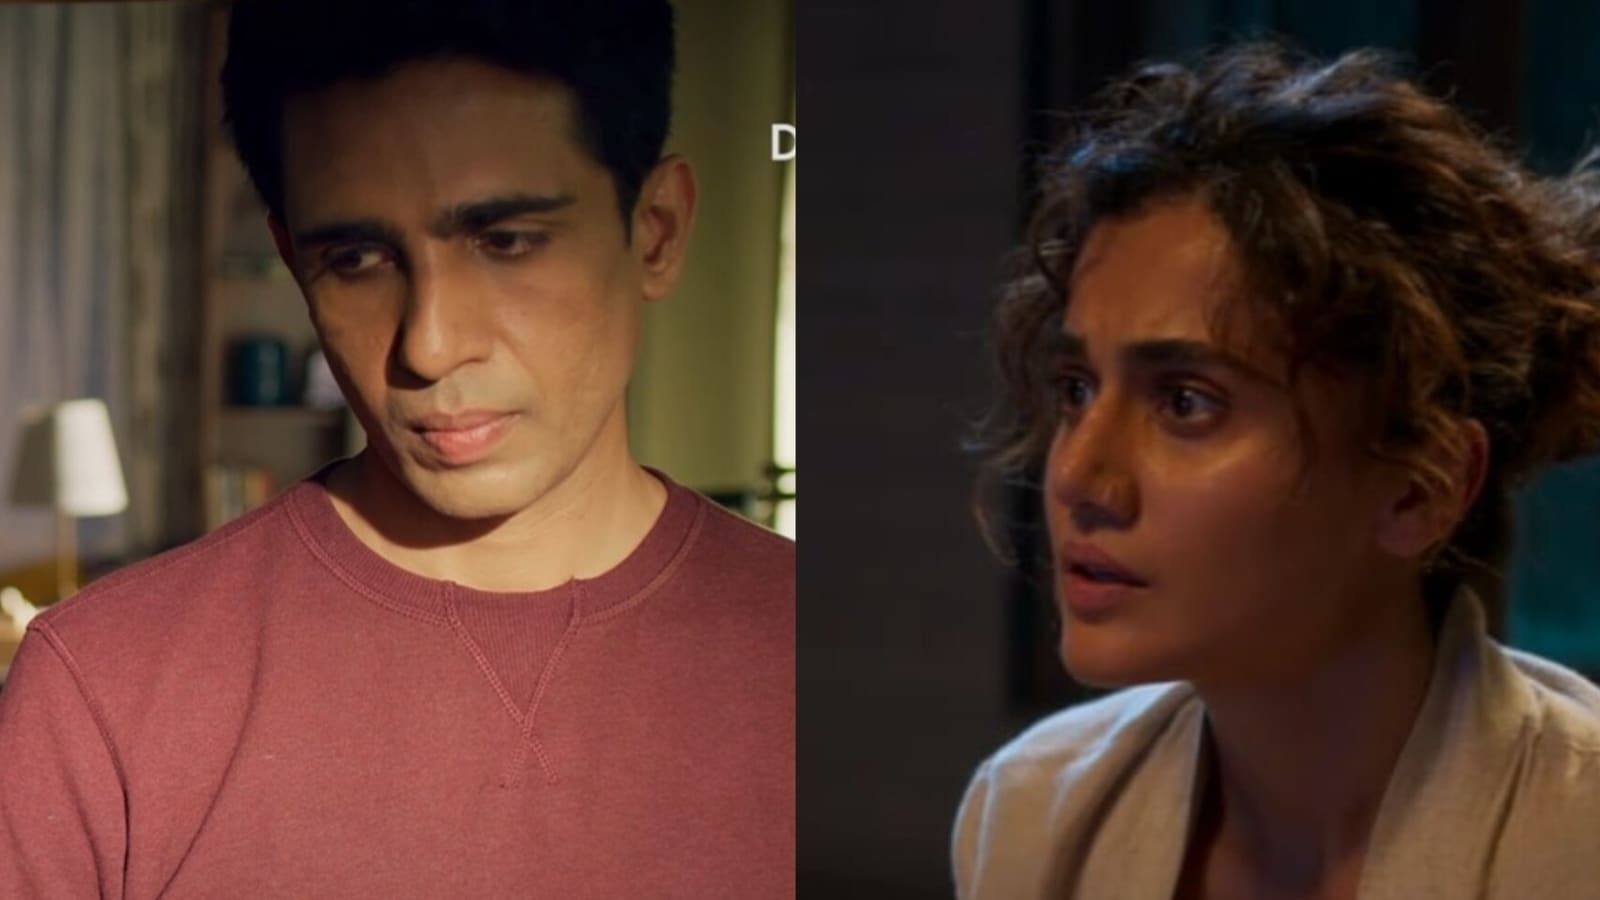 Gulshan Devaiah jokingly blames Taapsee Pannu after he gets trolled on Twitter. Here’s why